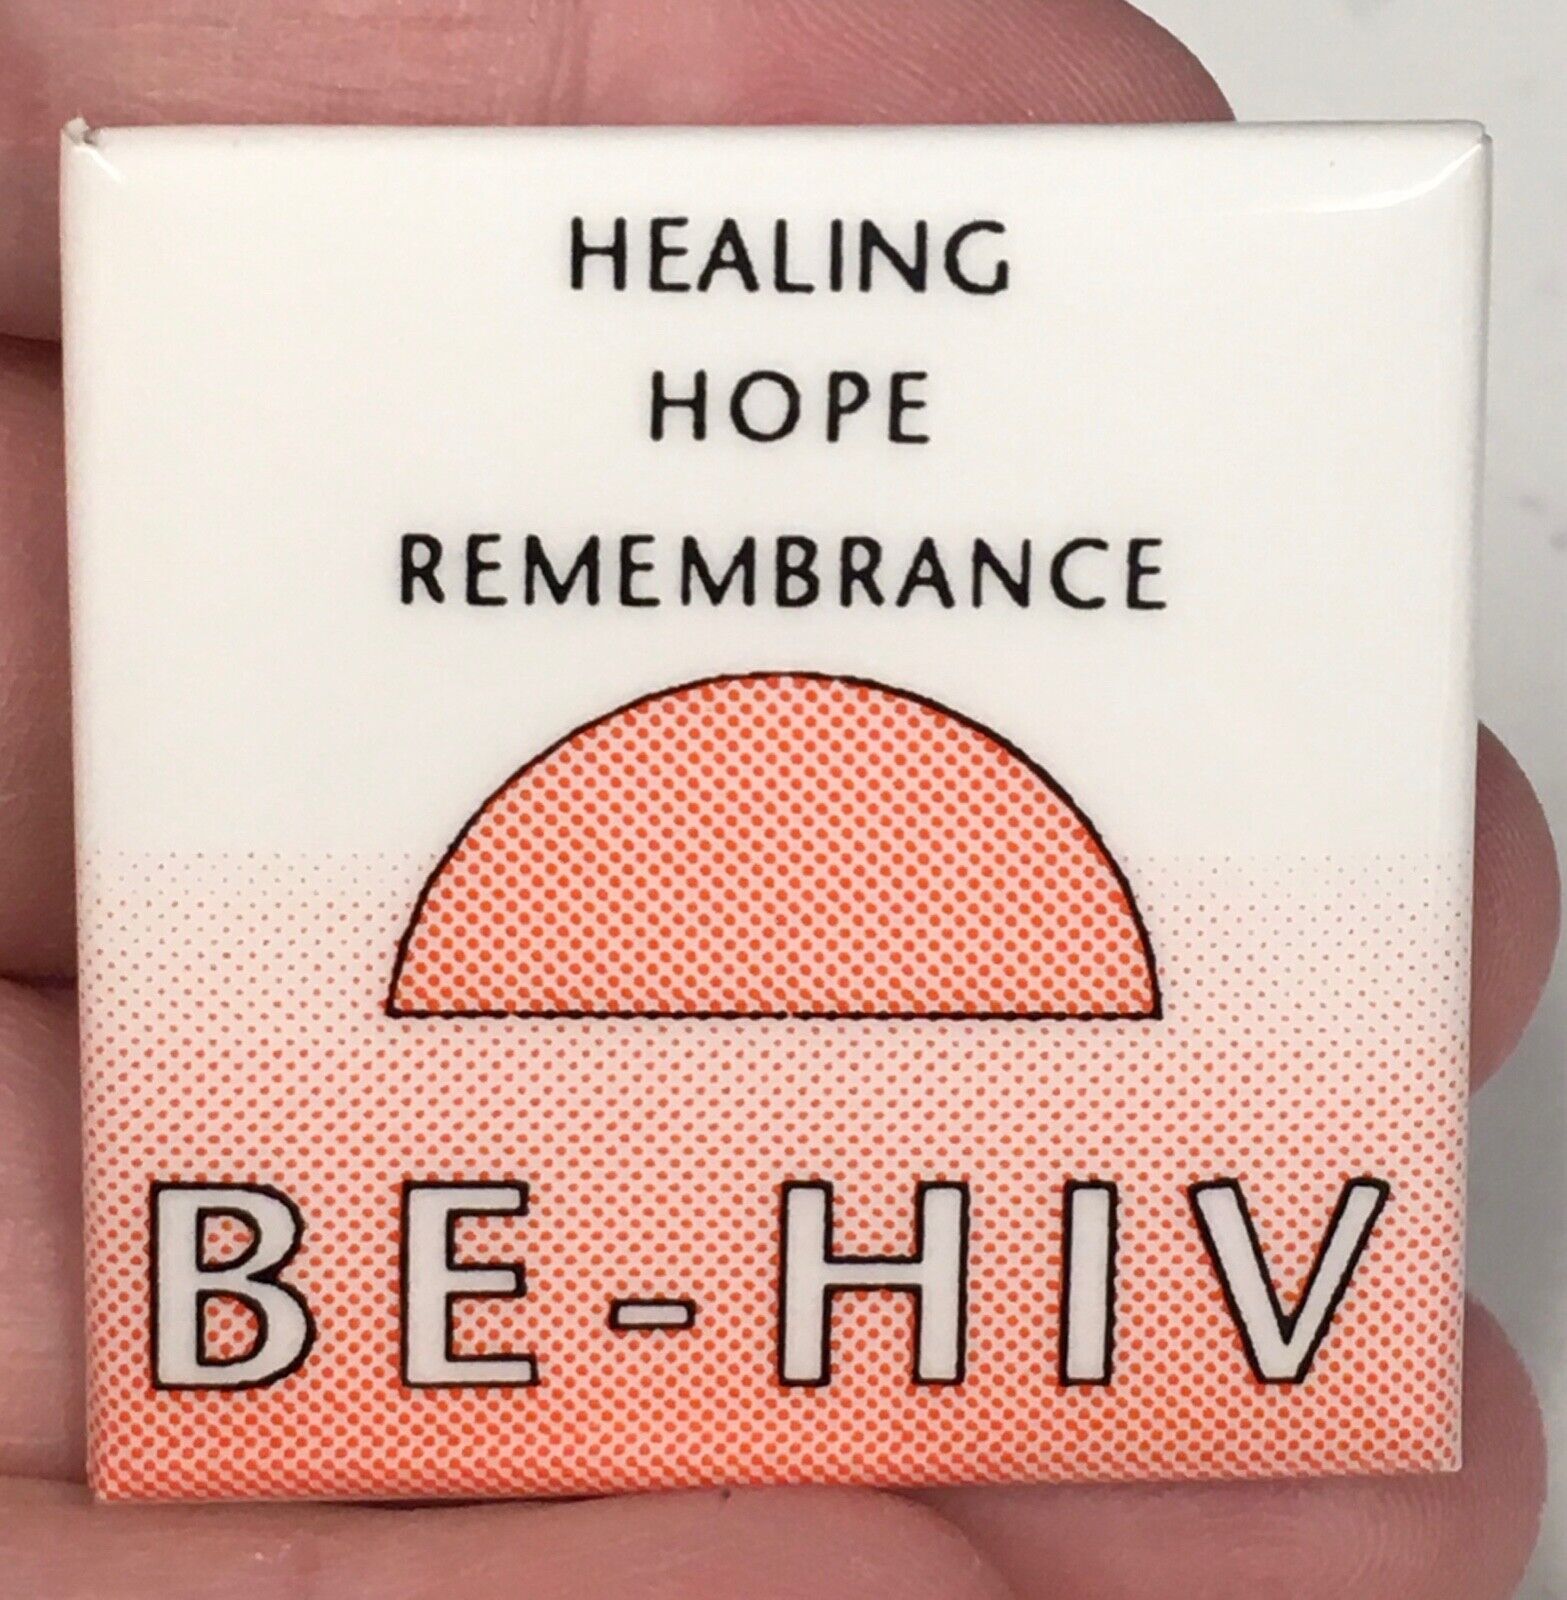 BE - HIV Healing Hope Remembrance vintage pinback button AIDS awareness activism